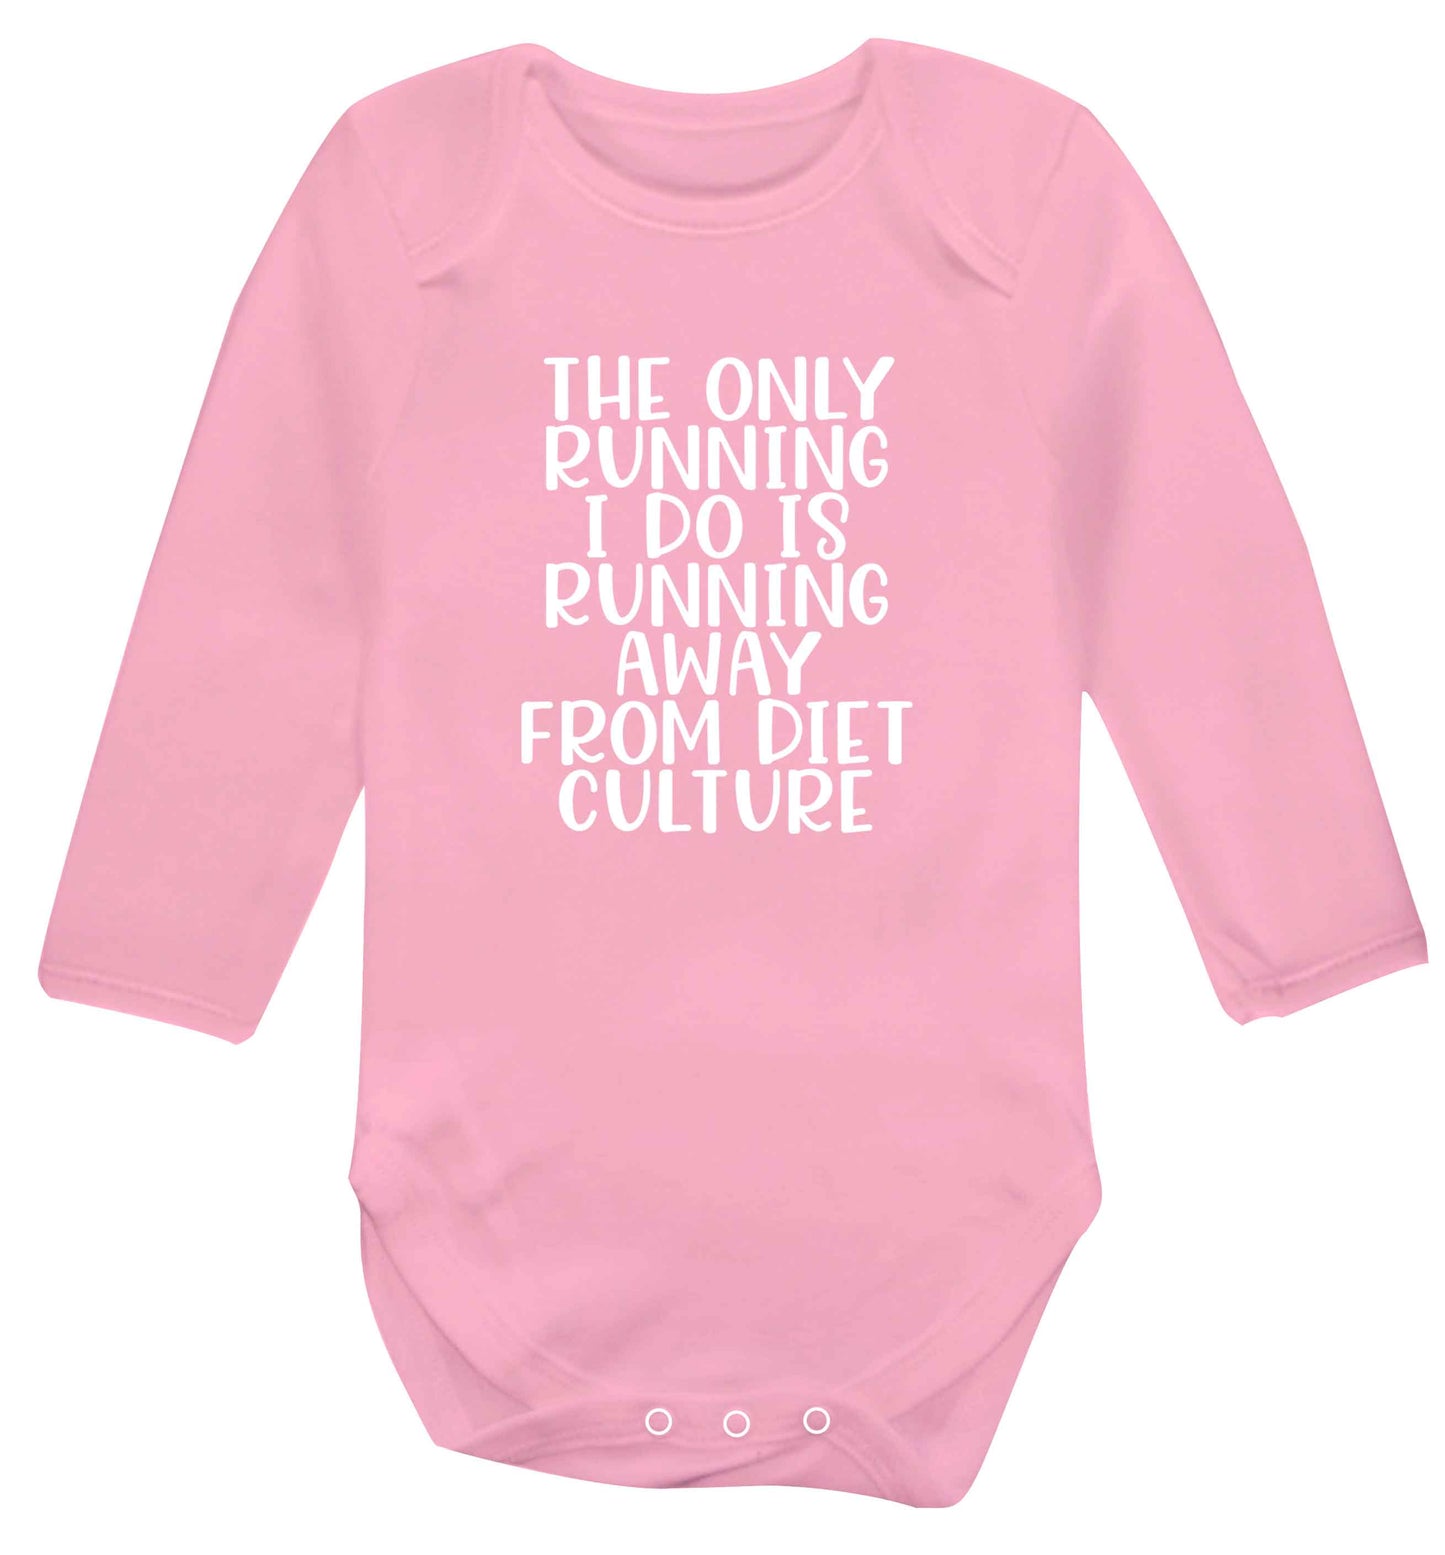 The only running I do is running away from diet culture baby vest long sleeved pale pink 6-12 months